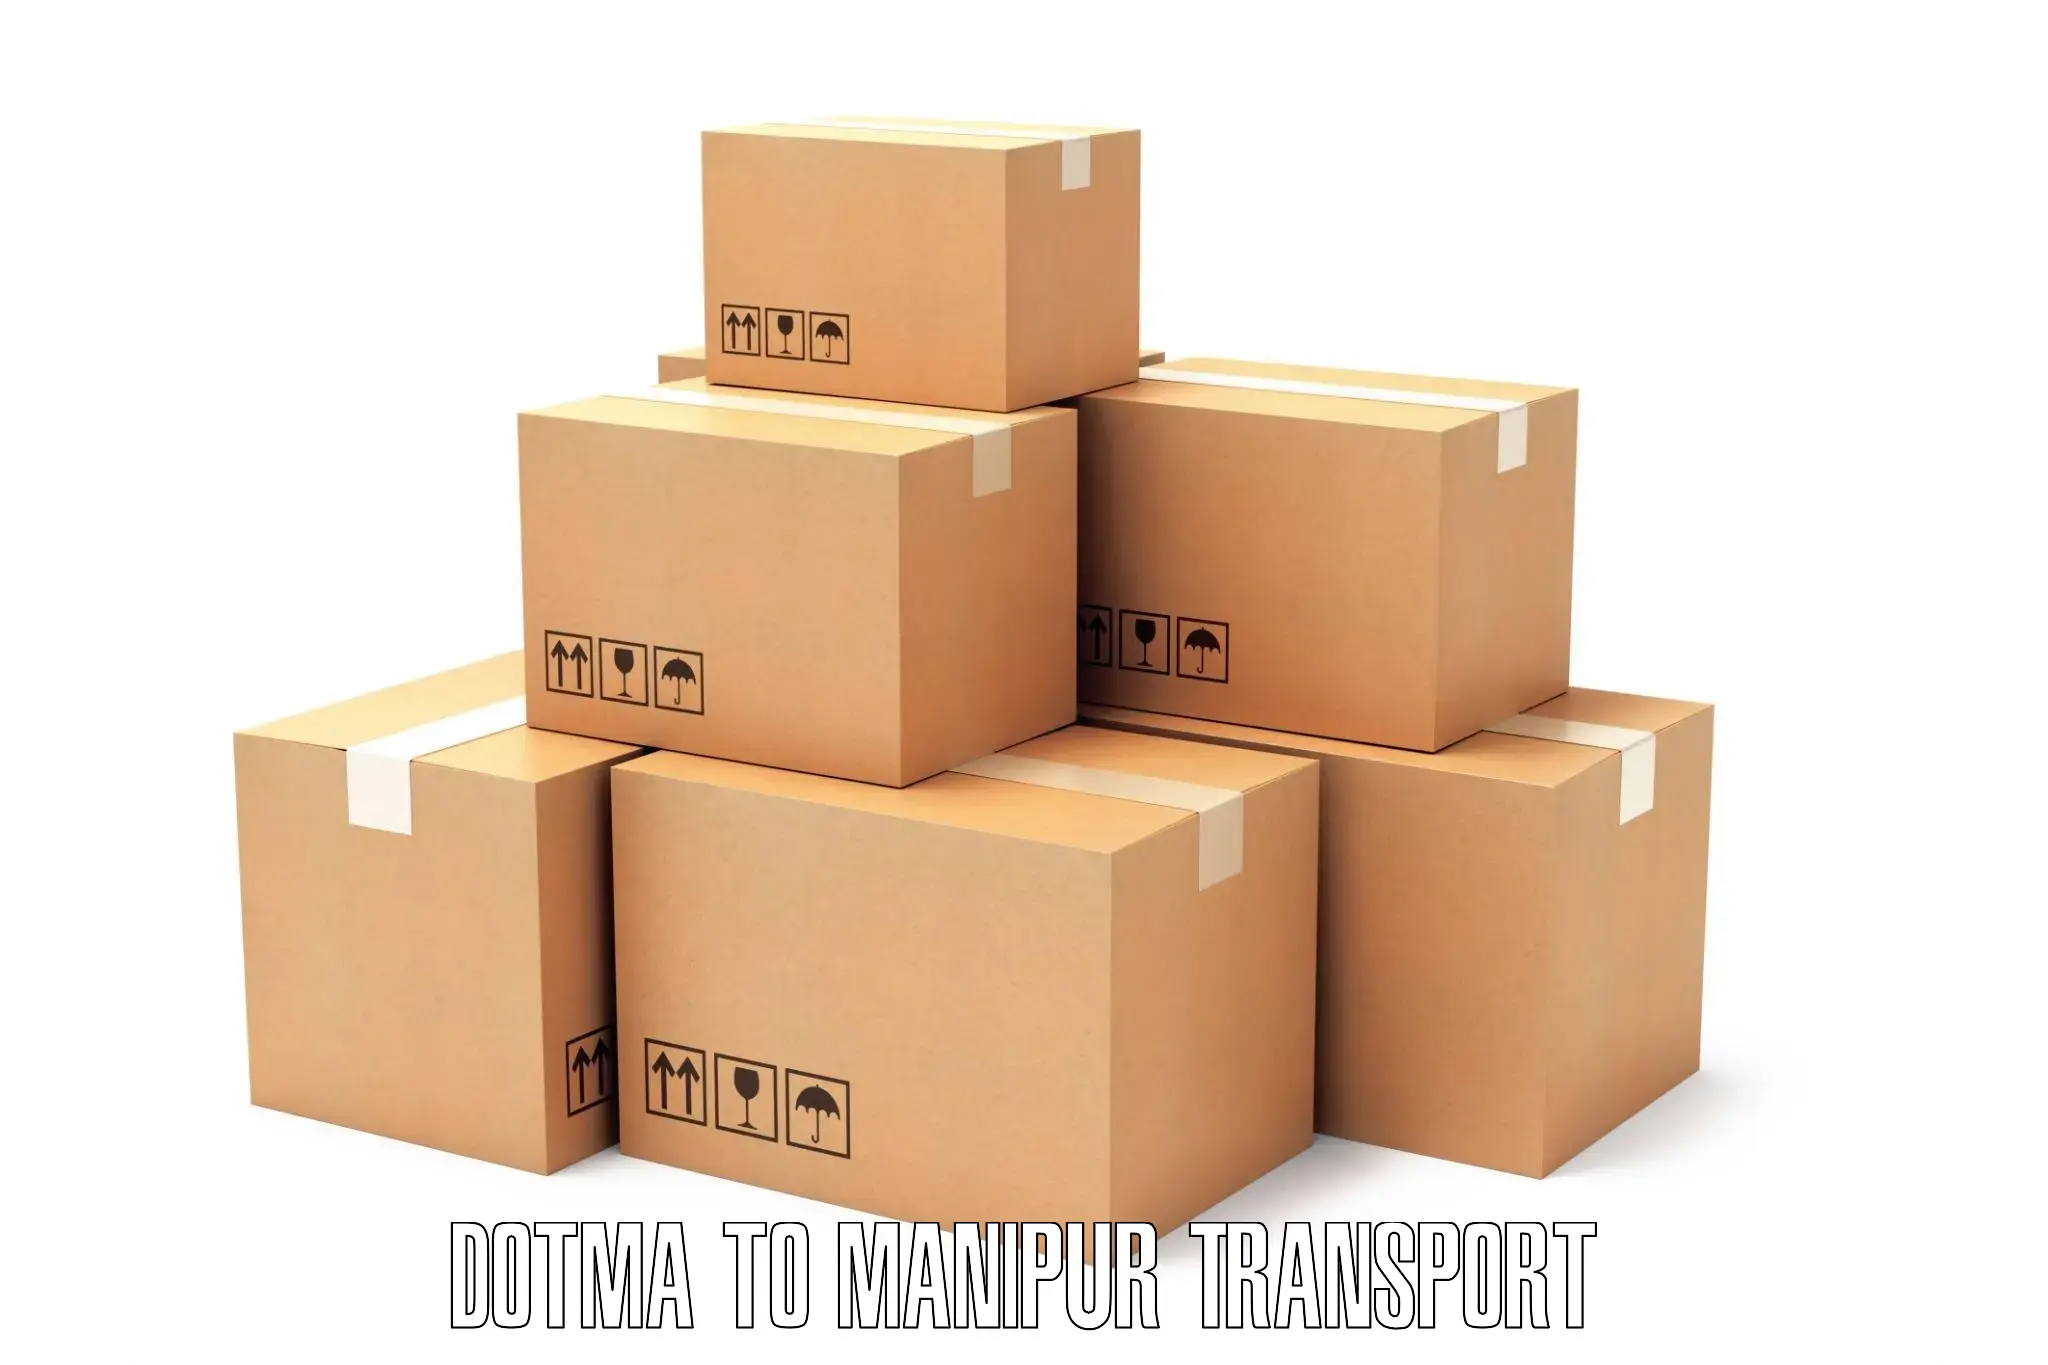 Luggage transport services Dotma to Manipur